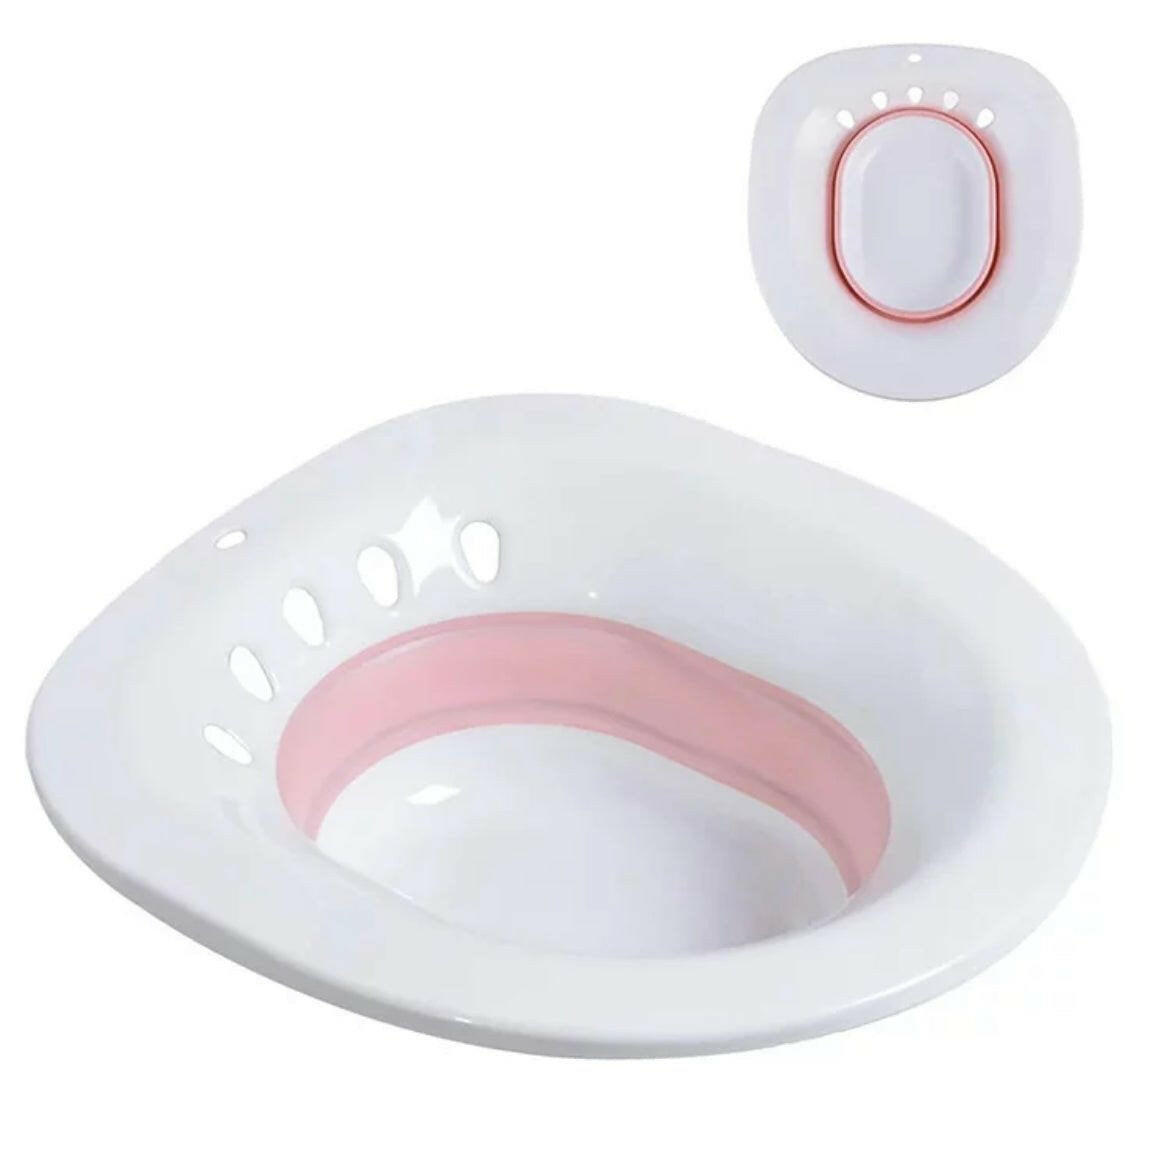 Sitz Bath for Toilet Seat - Sitz Bath for Hemorrhoids and Postpartum Care, Foldable Postpartum Care Basin, Yoni Steam Seat Alleviate Vaginal or Anal Inflammation Naturally.